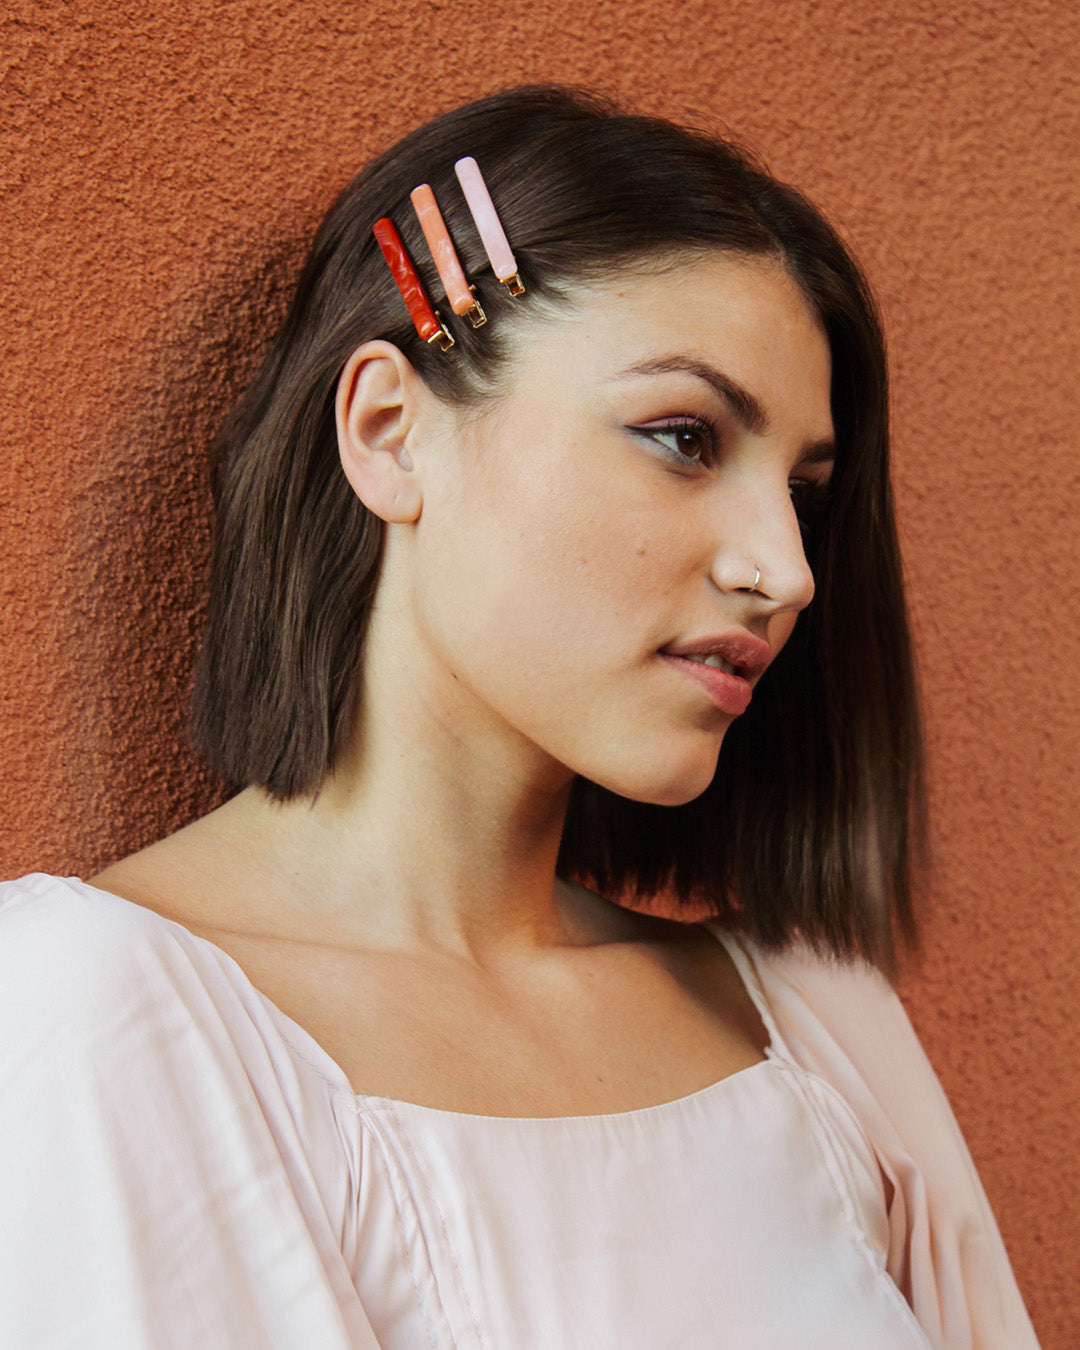 BANDED Women’s Premium Hair Accessories - Canyon Vista - Marbled Bar Clips